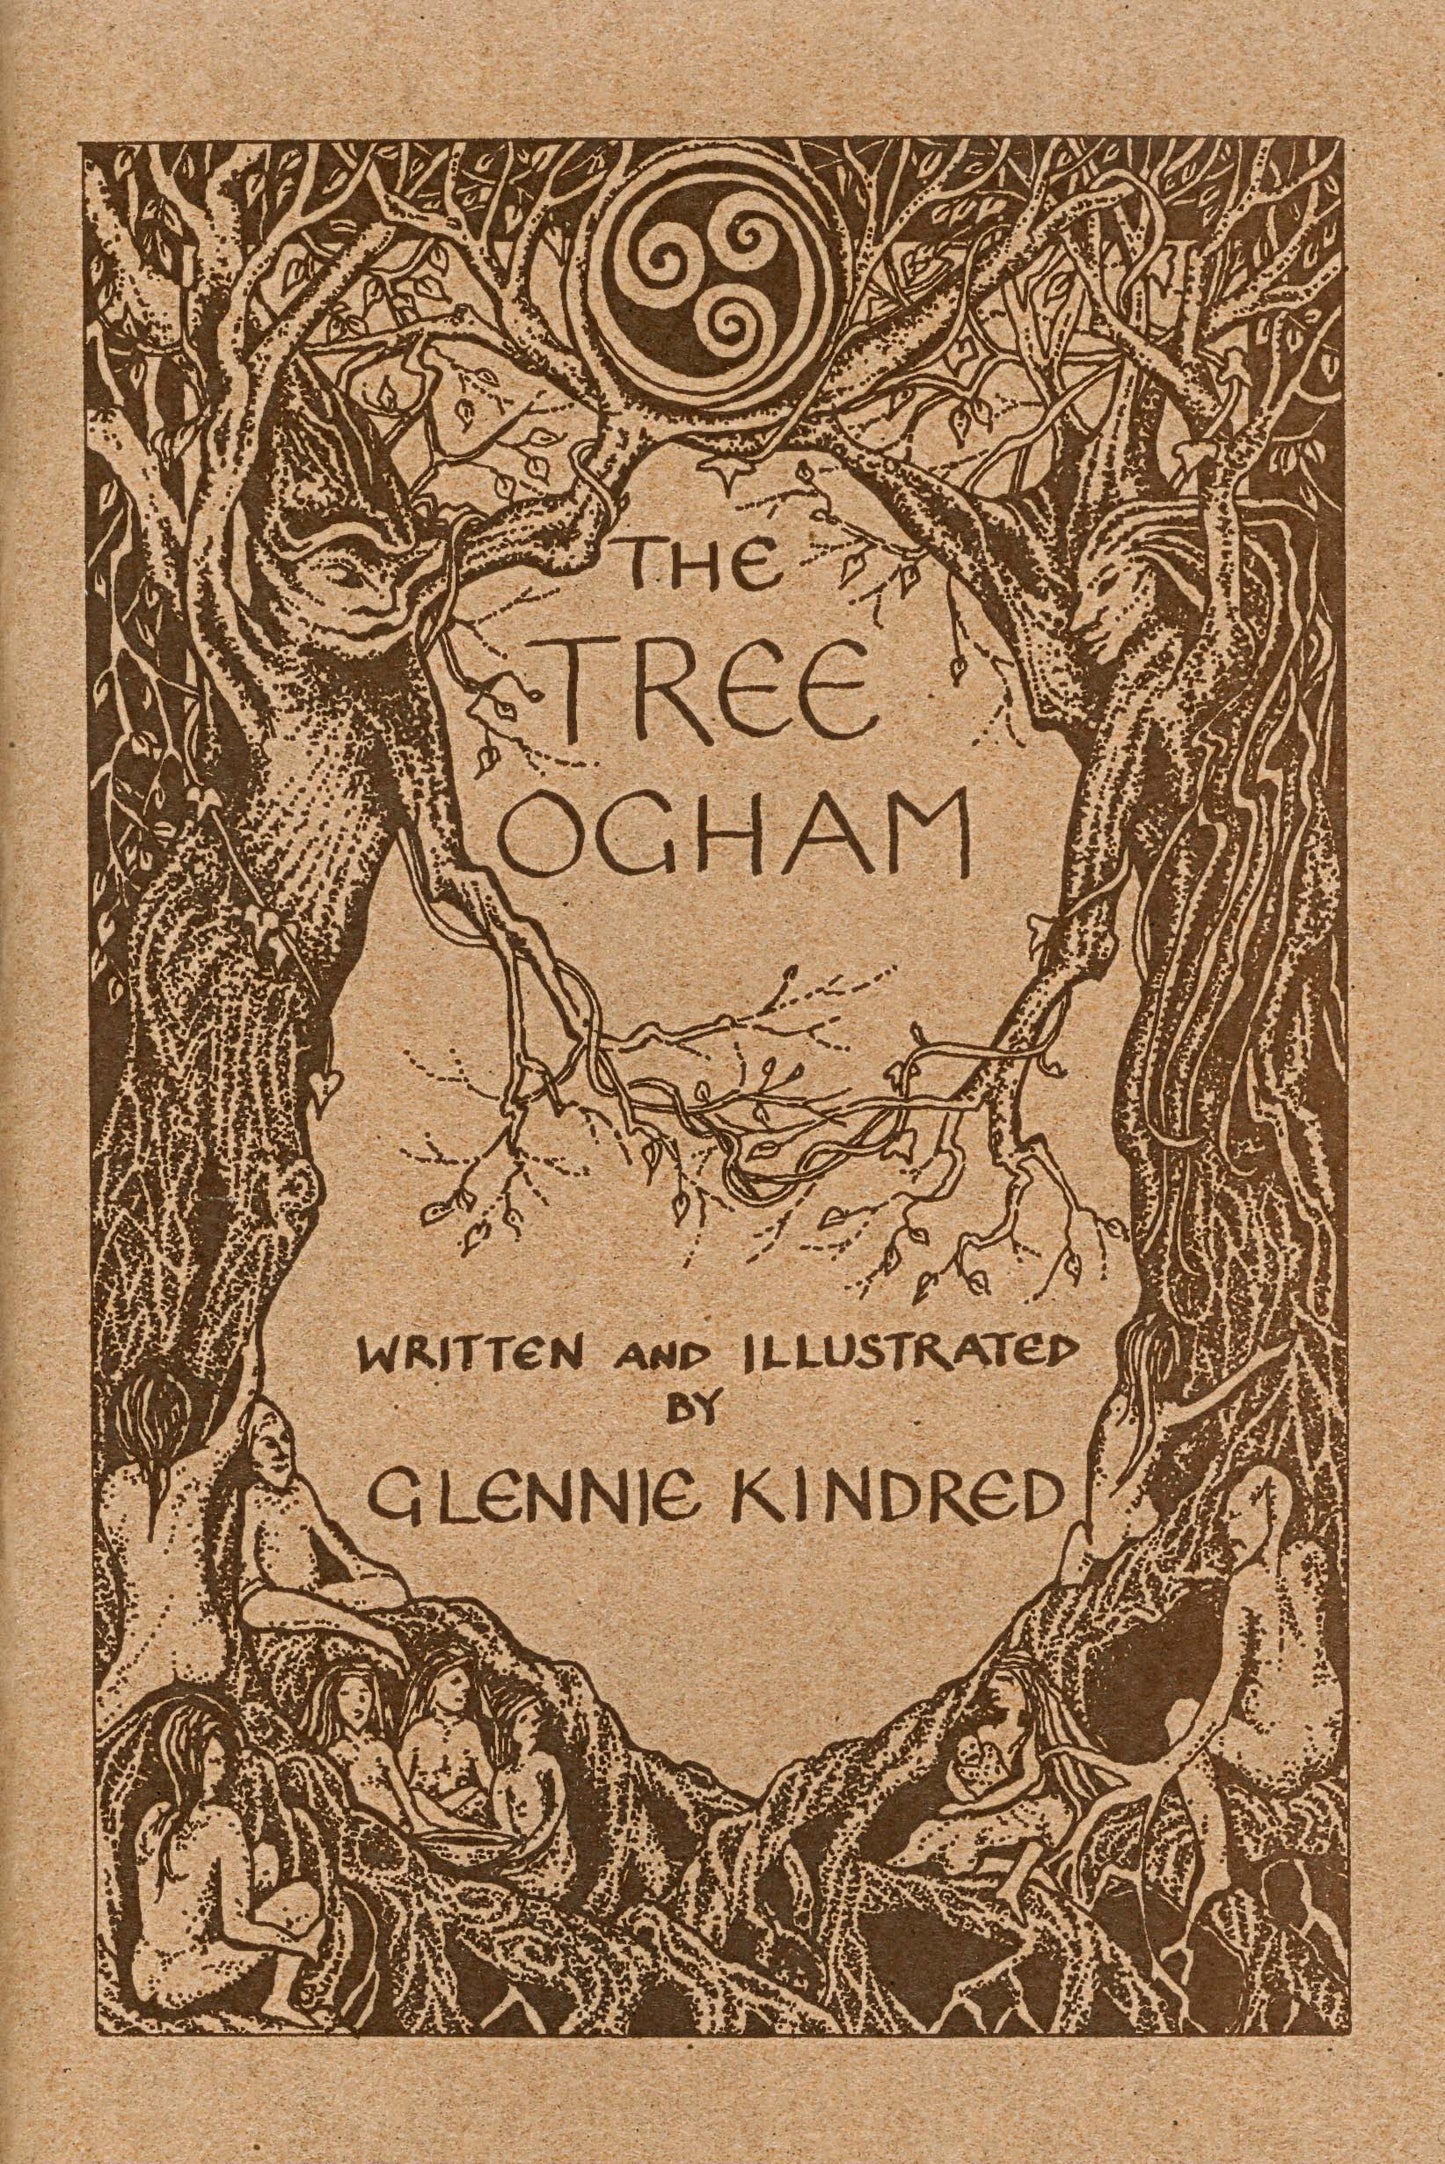 The Tree Ogham by Glennie Kindred